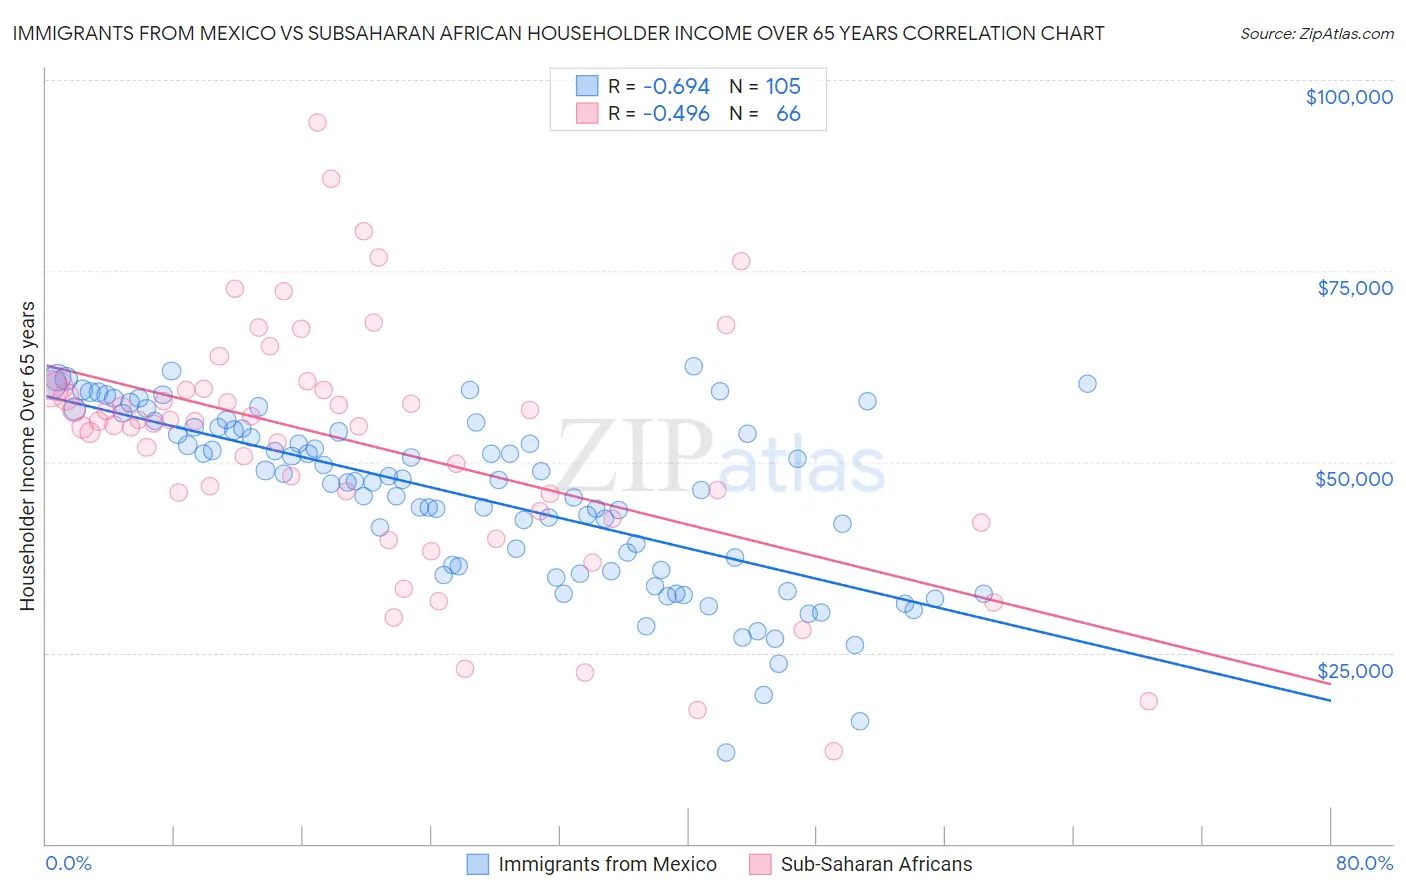 Immigrants from Mexico vs Subsaharan African Householder Income Over 65 years